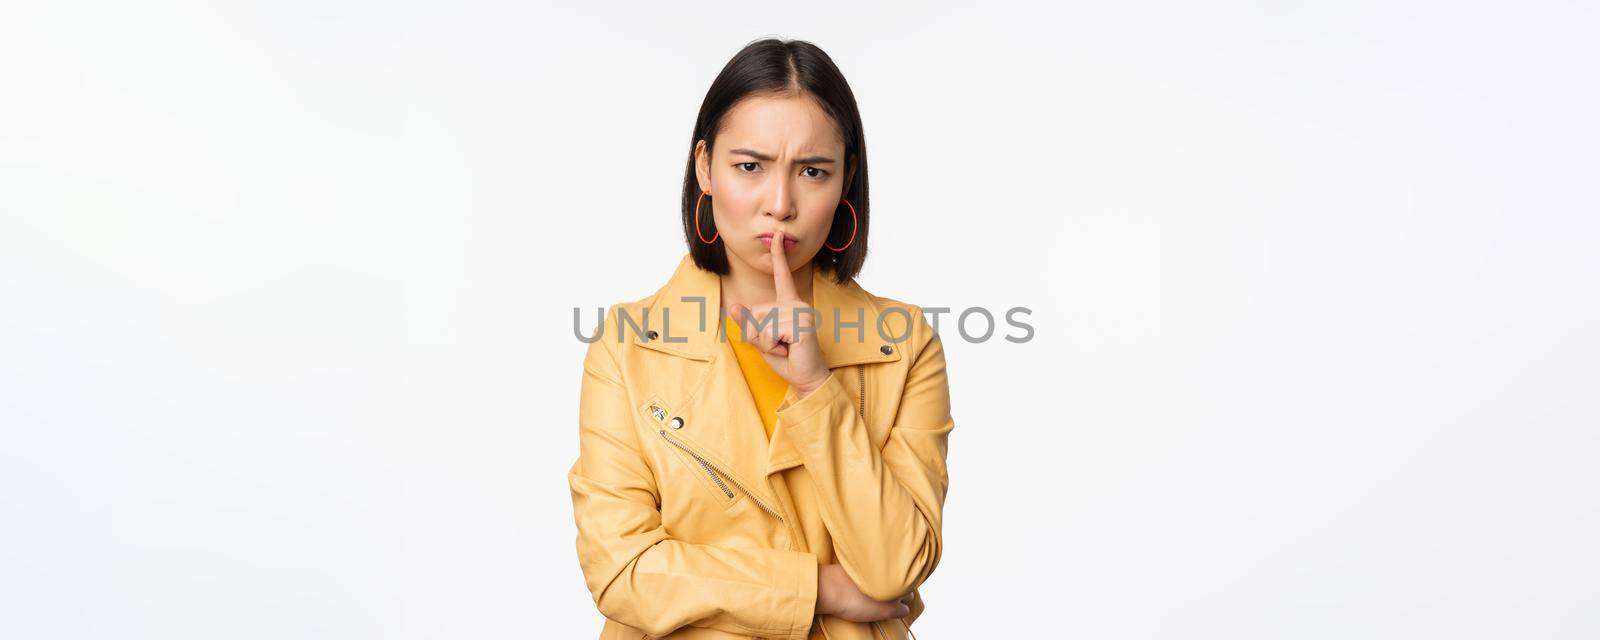 Portrait of angry korean girl shushing, woman frowning and tell to be quiet, showing hush, shh gesture, press finger to lips, taboo sign, standing over white background.